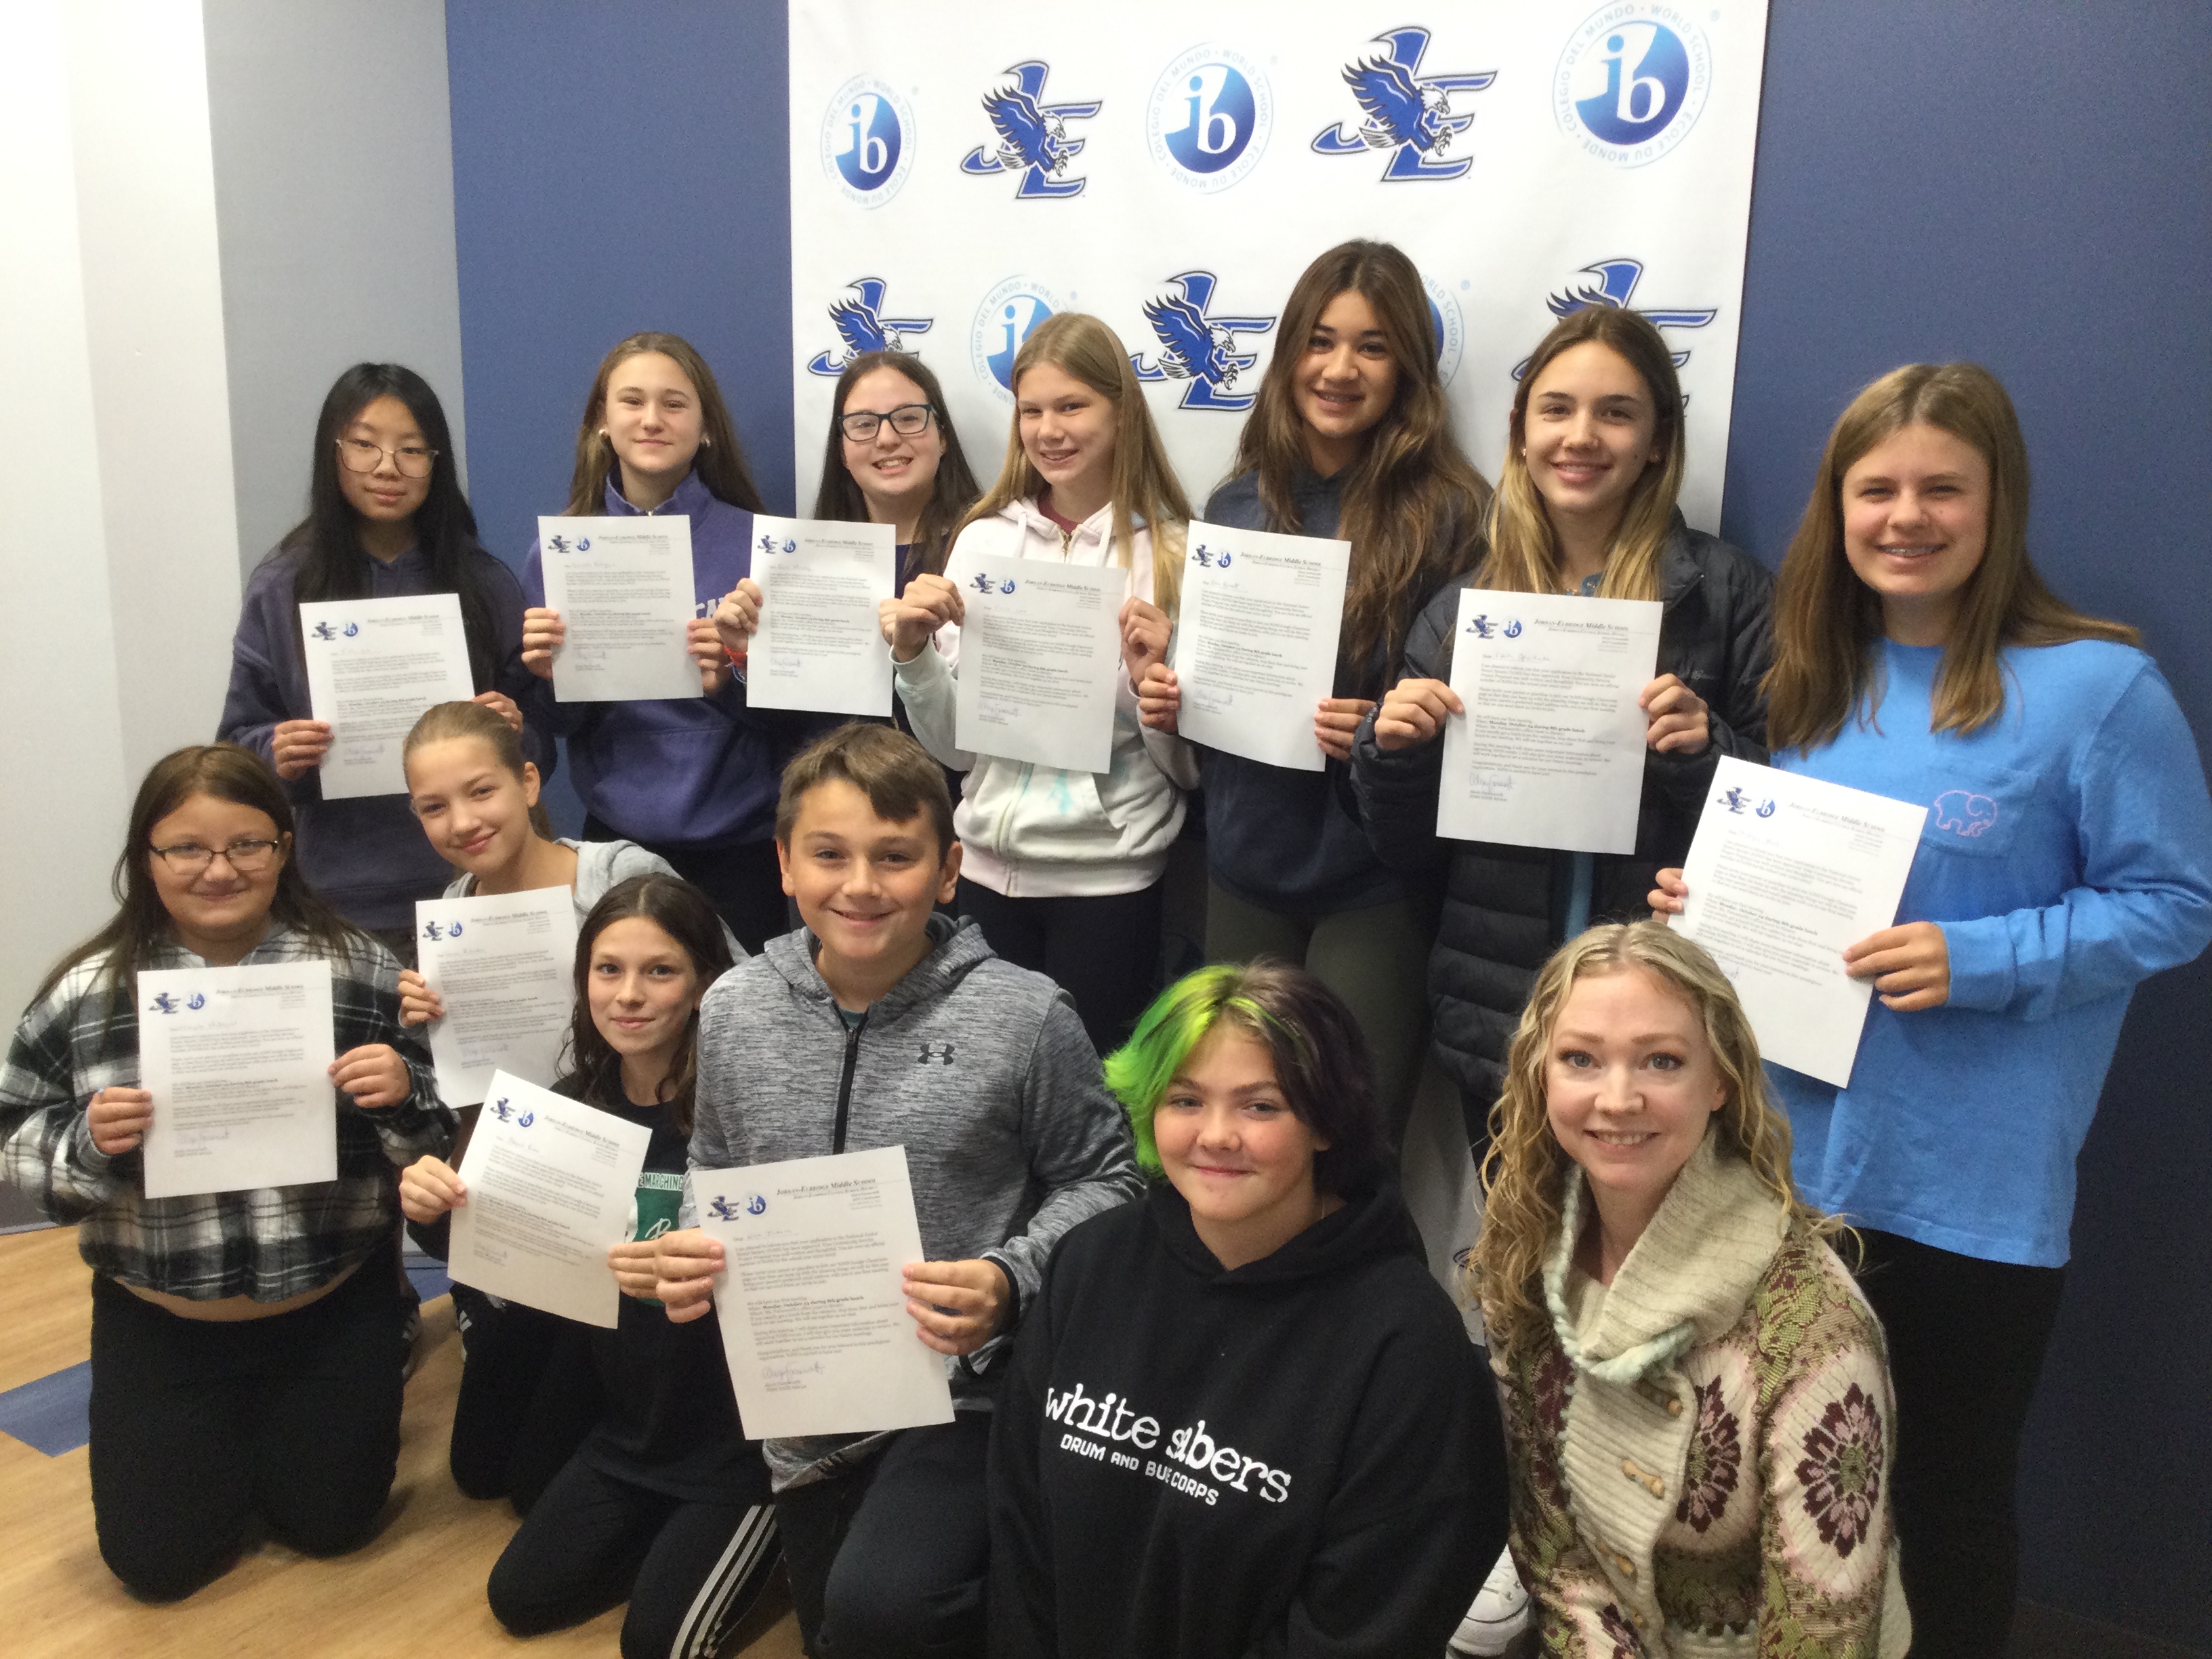 A group of JEMS students hold up certificates after being accepted into the National Junior Honor Society